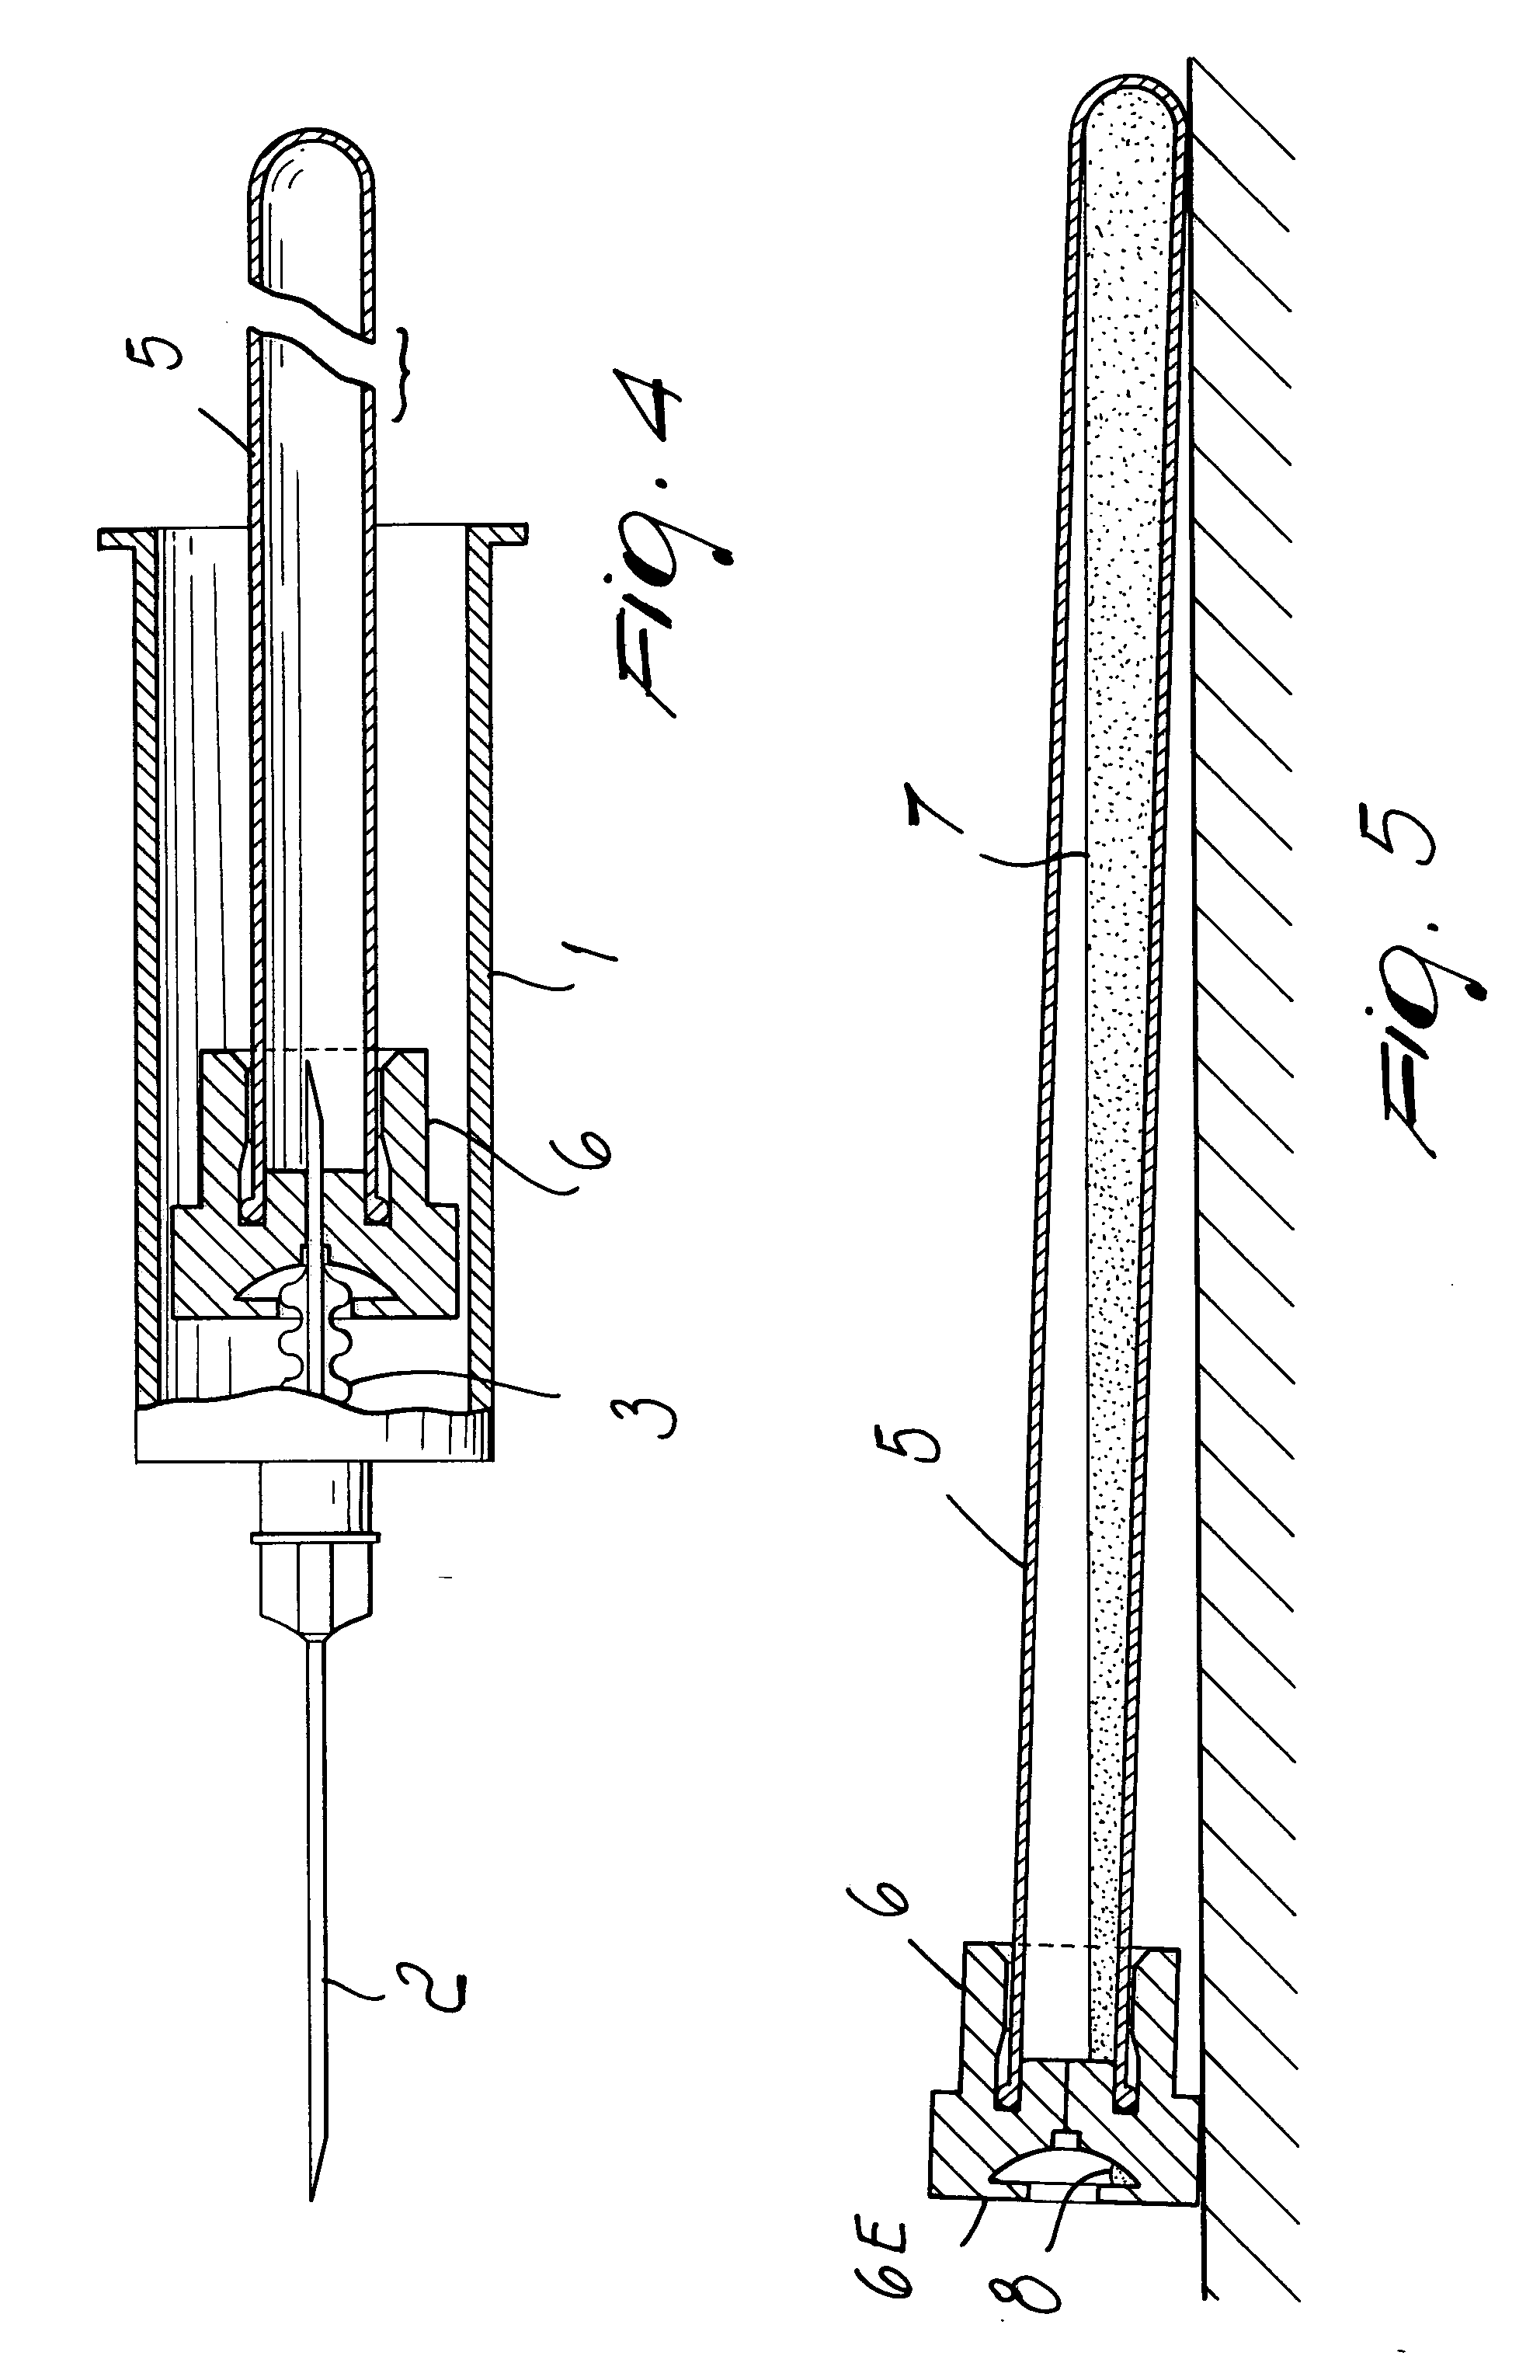 Tube for blood collecting with a vacuum method